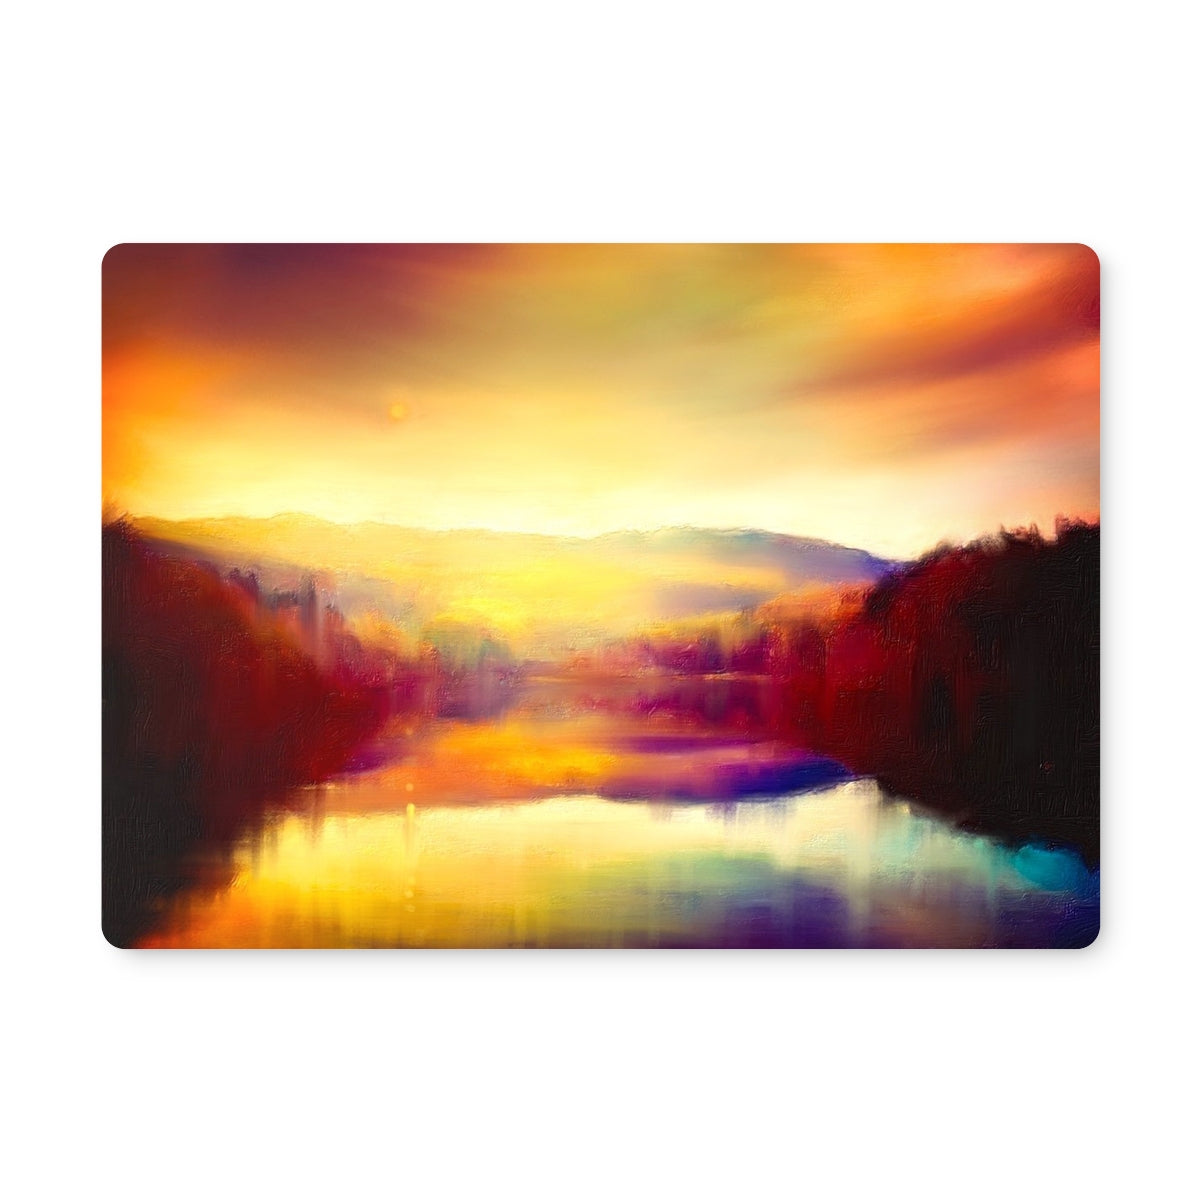 Loch Faskally Dusk Art Gifts Placemat-Placemats-Scottish Lochs & Mountains Art Gallery-Single Placemat-Paintings, Prints, Homeware, Art Gifts From Scotland By Scottish Artist Kevin Hunter